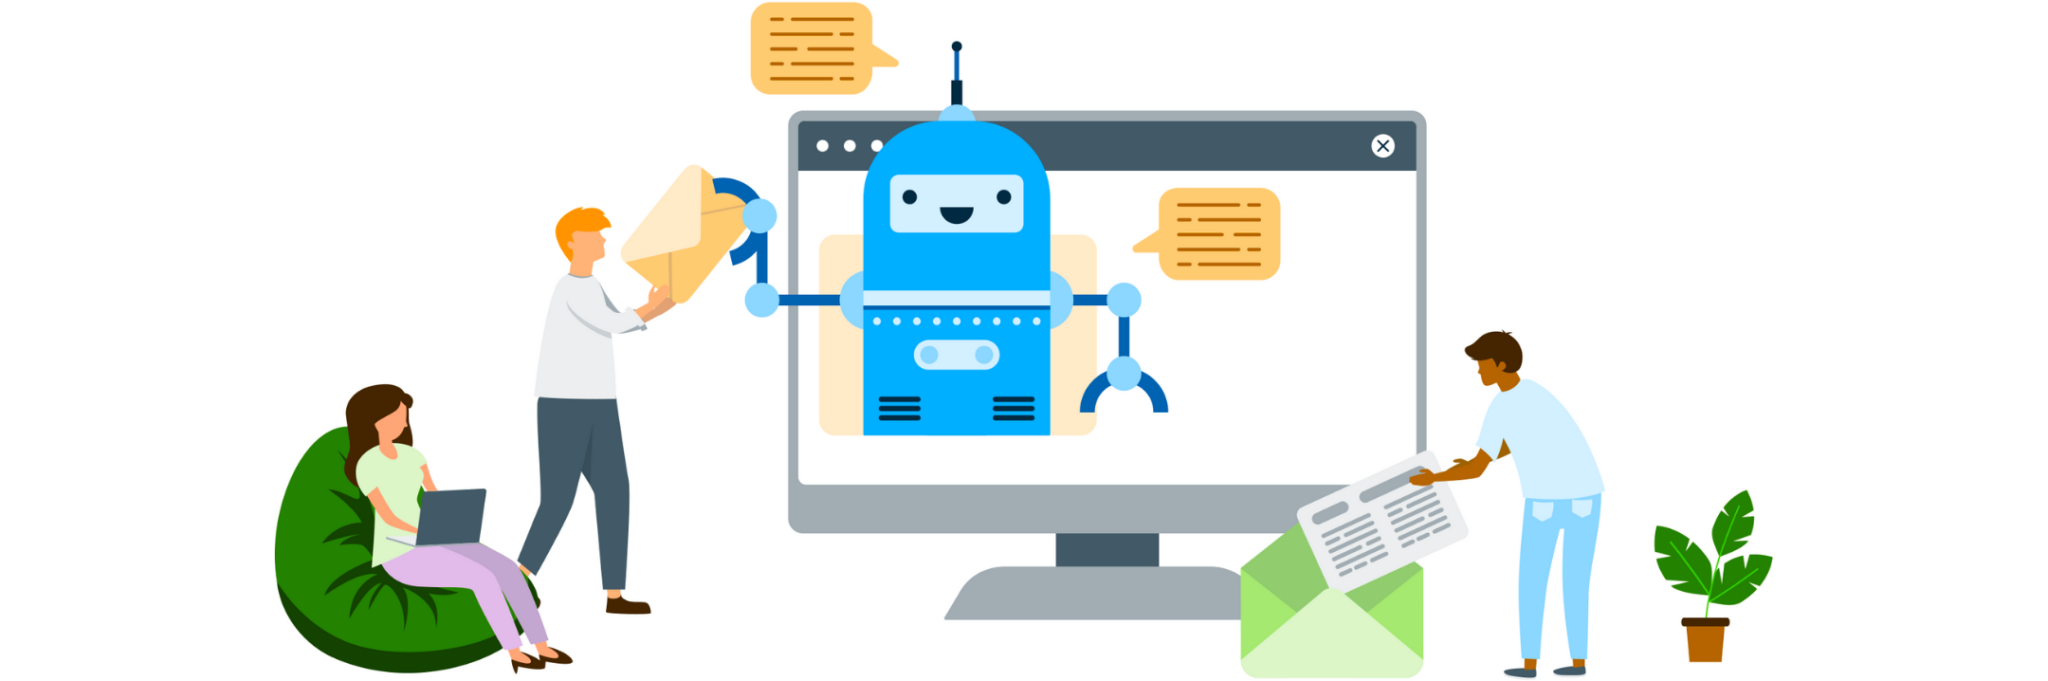 What are Chatbots? How are Companies Using Chatbots Effectively?